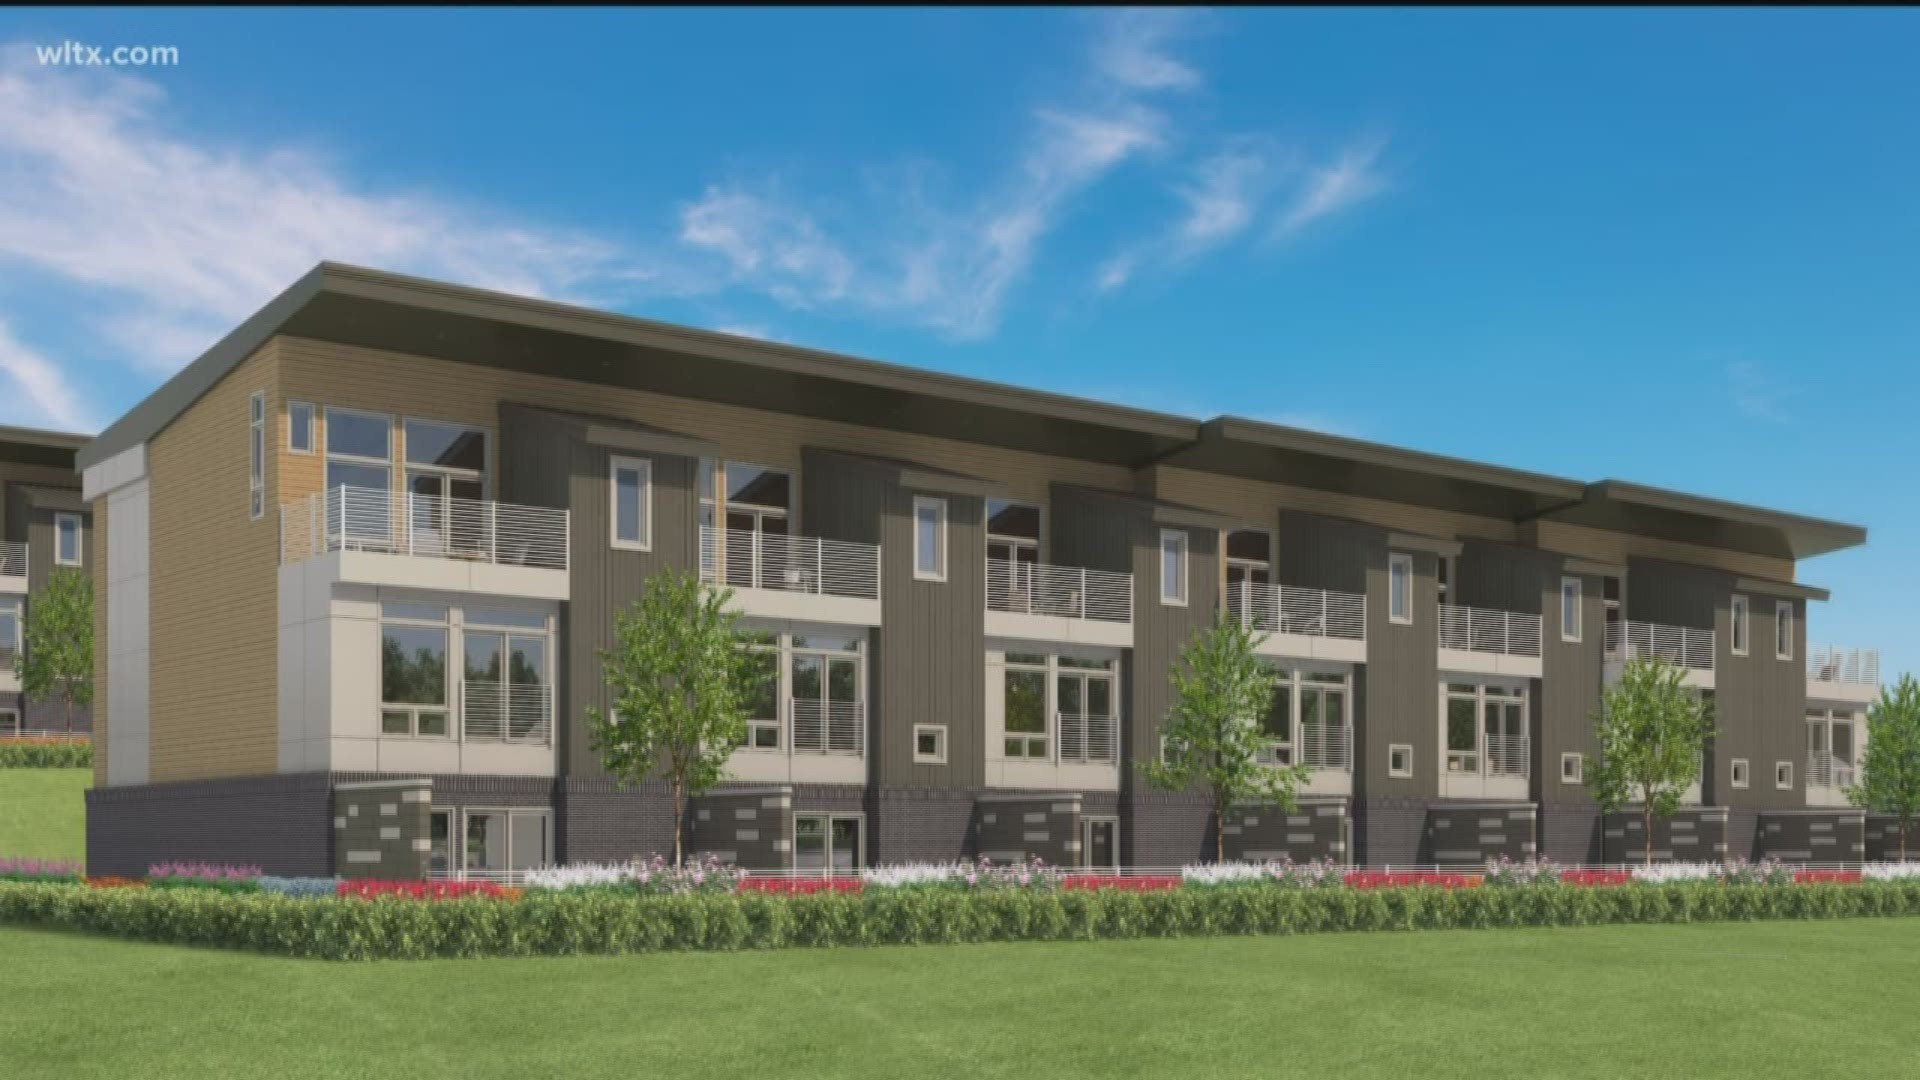 Flow2 townhomes will overlook Congaree River